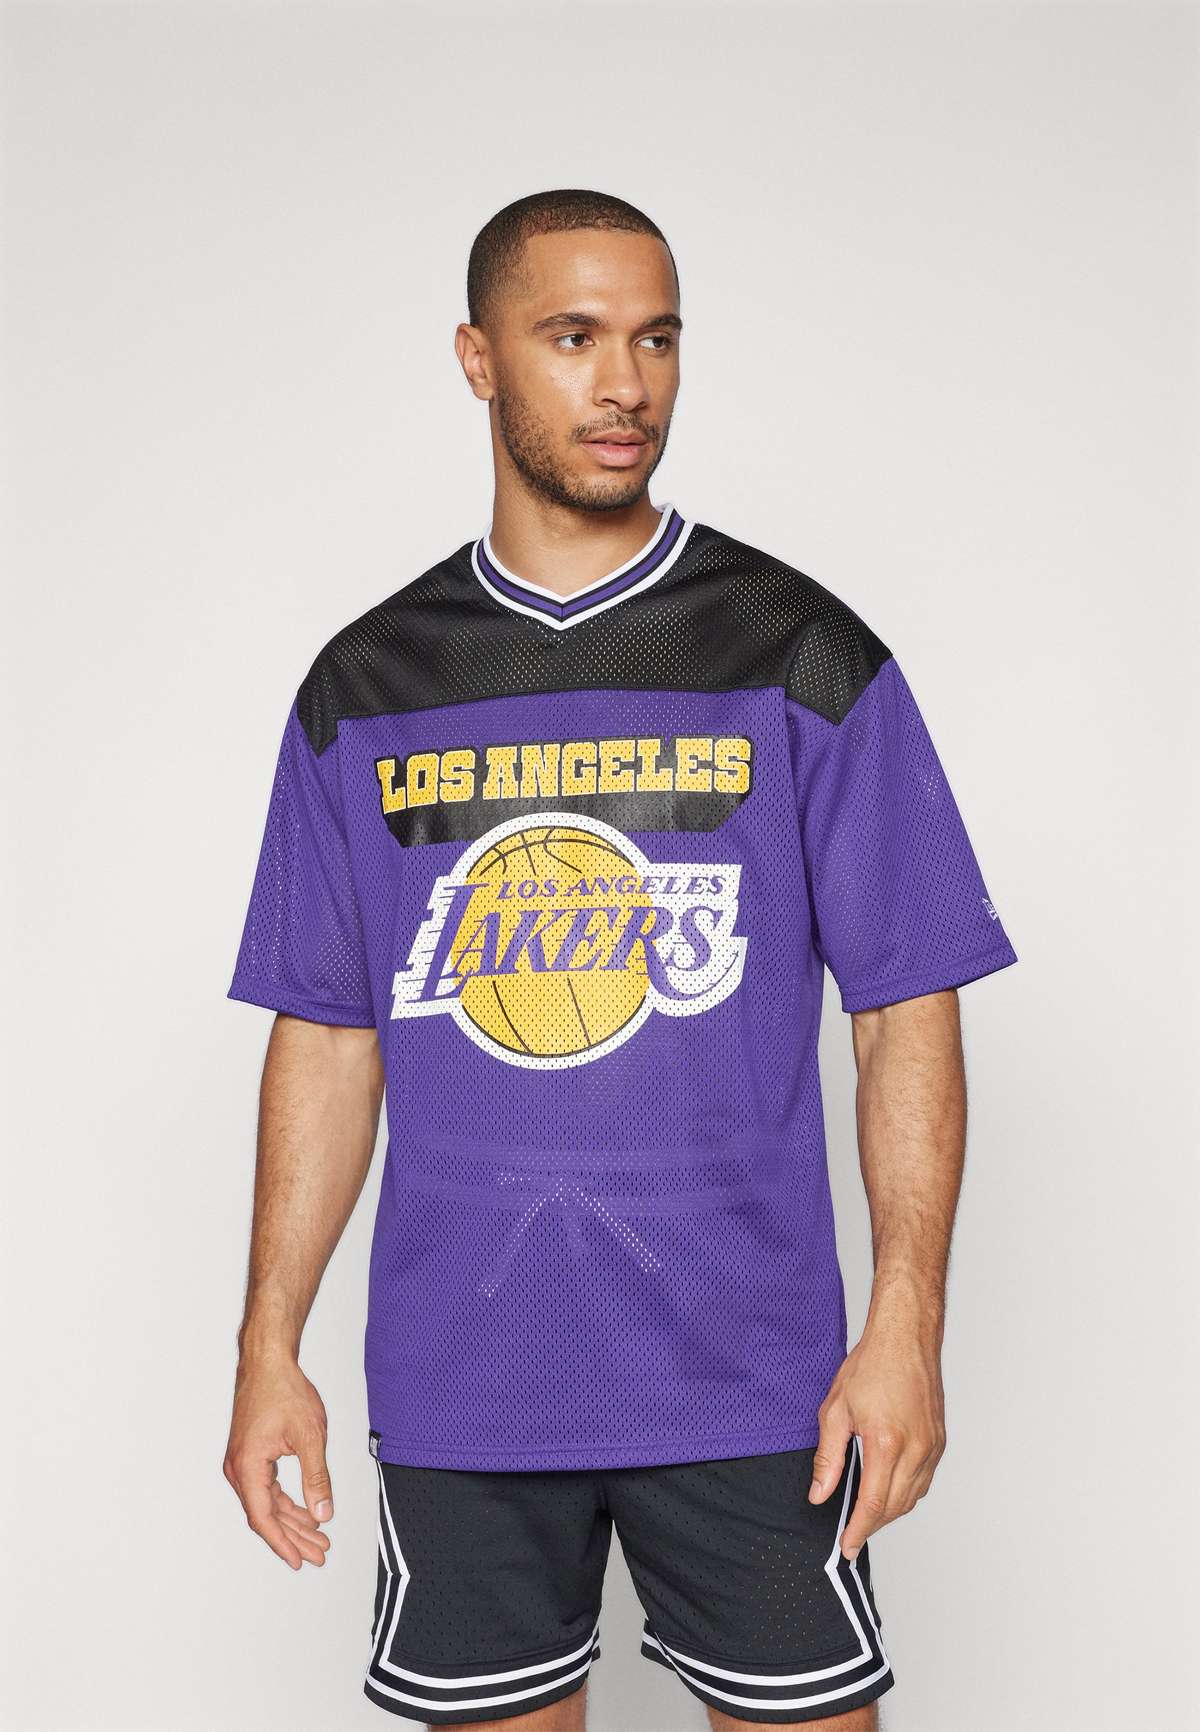 NBA LOS ANGELES LAKERS GRAPHIC JERSEY - Vereinsmannschaften NBA LOS ANGELES LAKERS GRAPHIC JERSEY